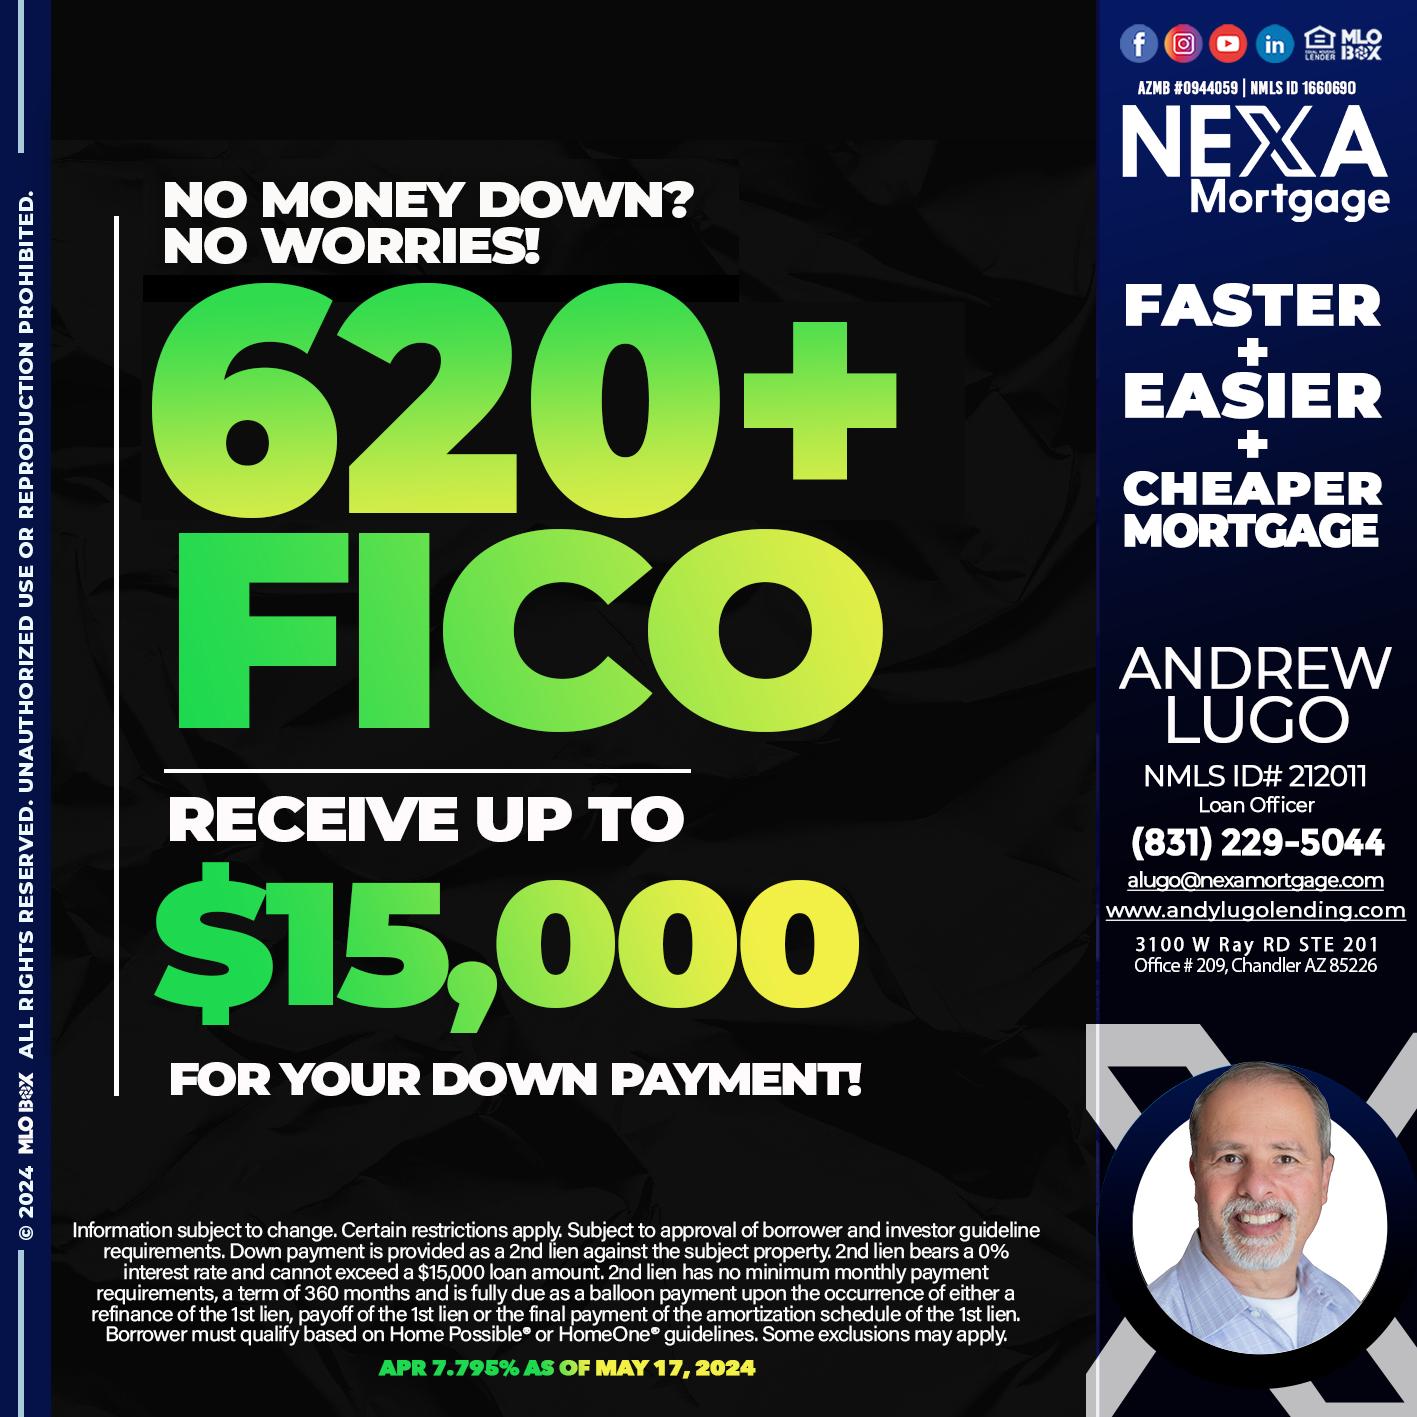 620 FICO - Andrew Lugo -Loan Officer